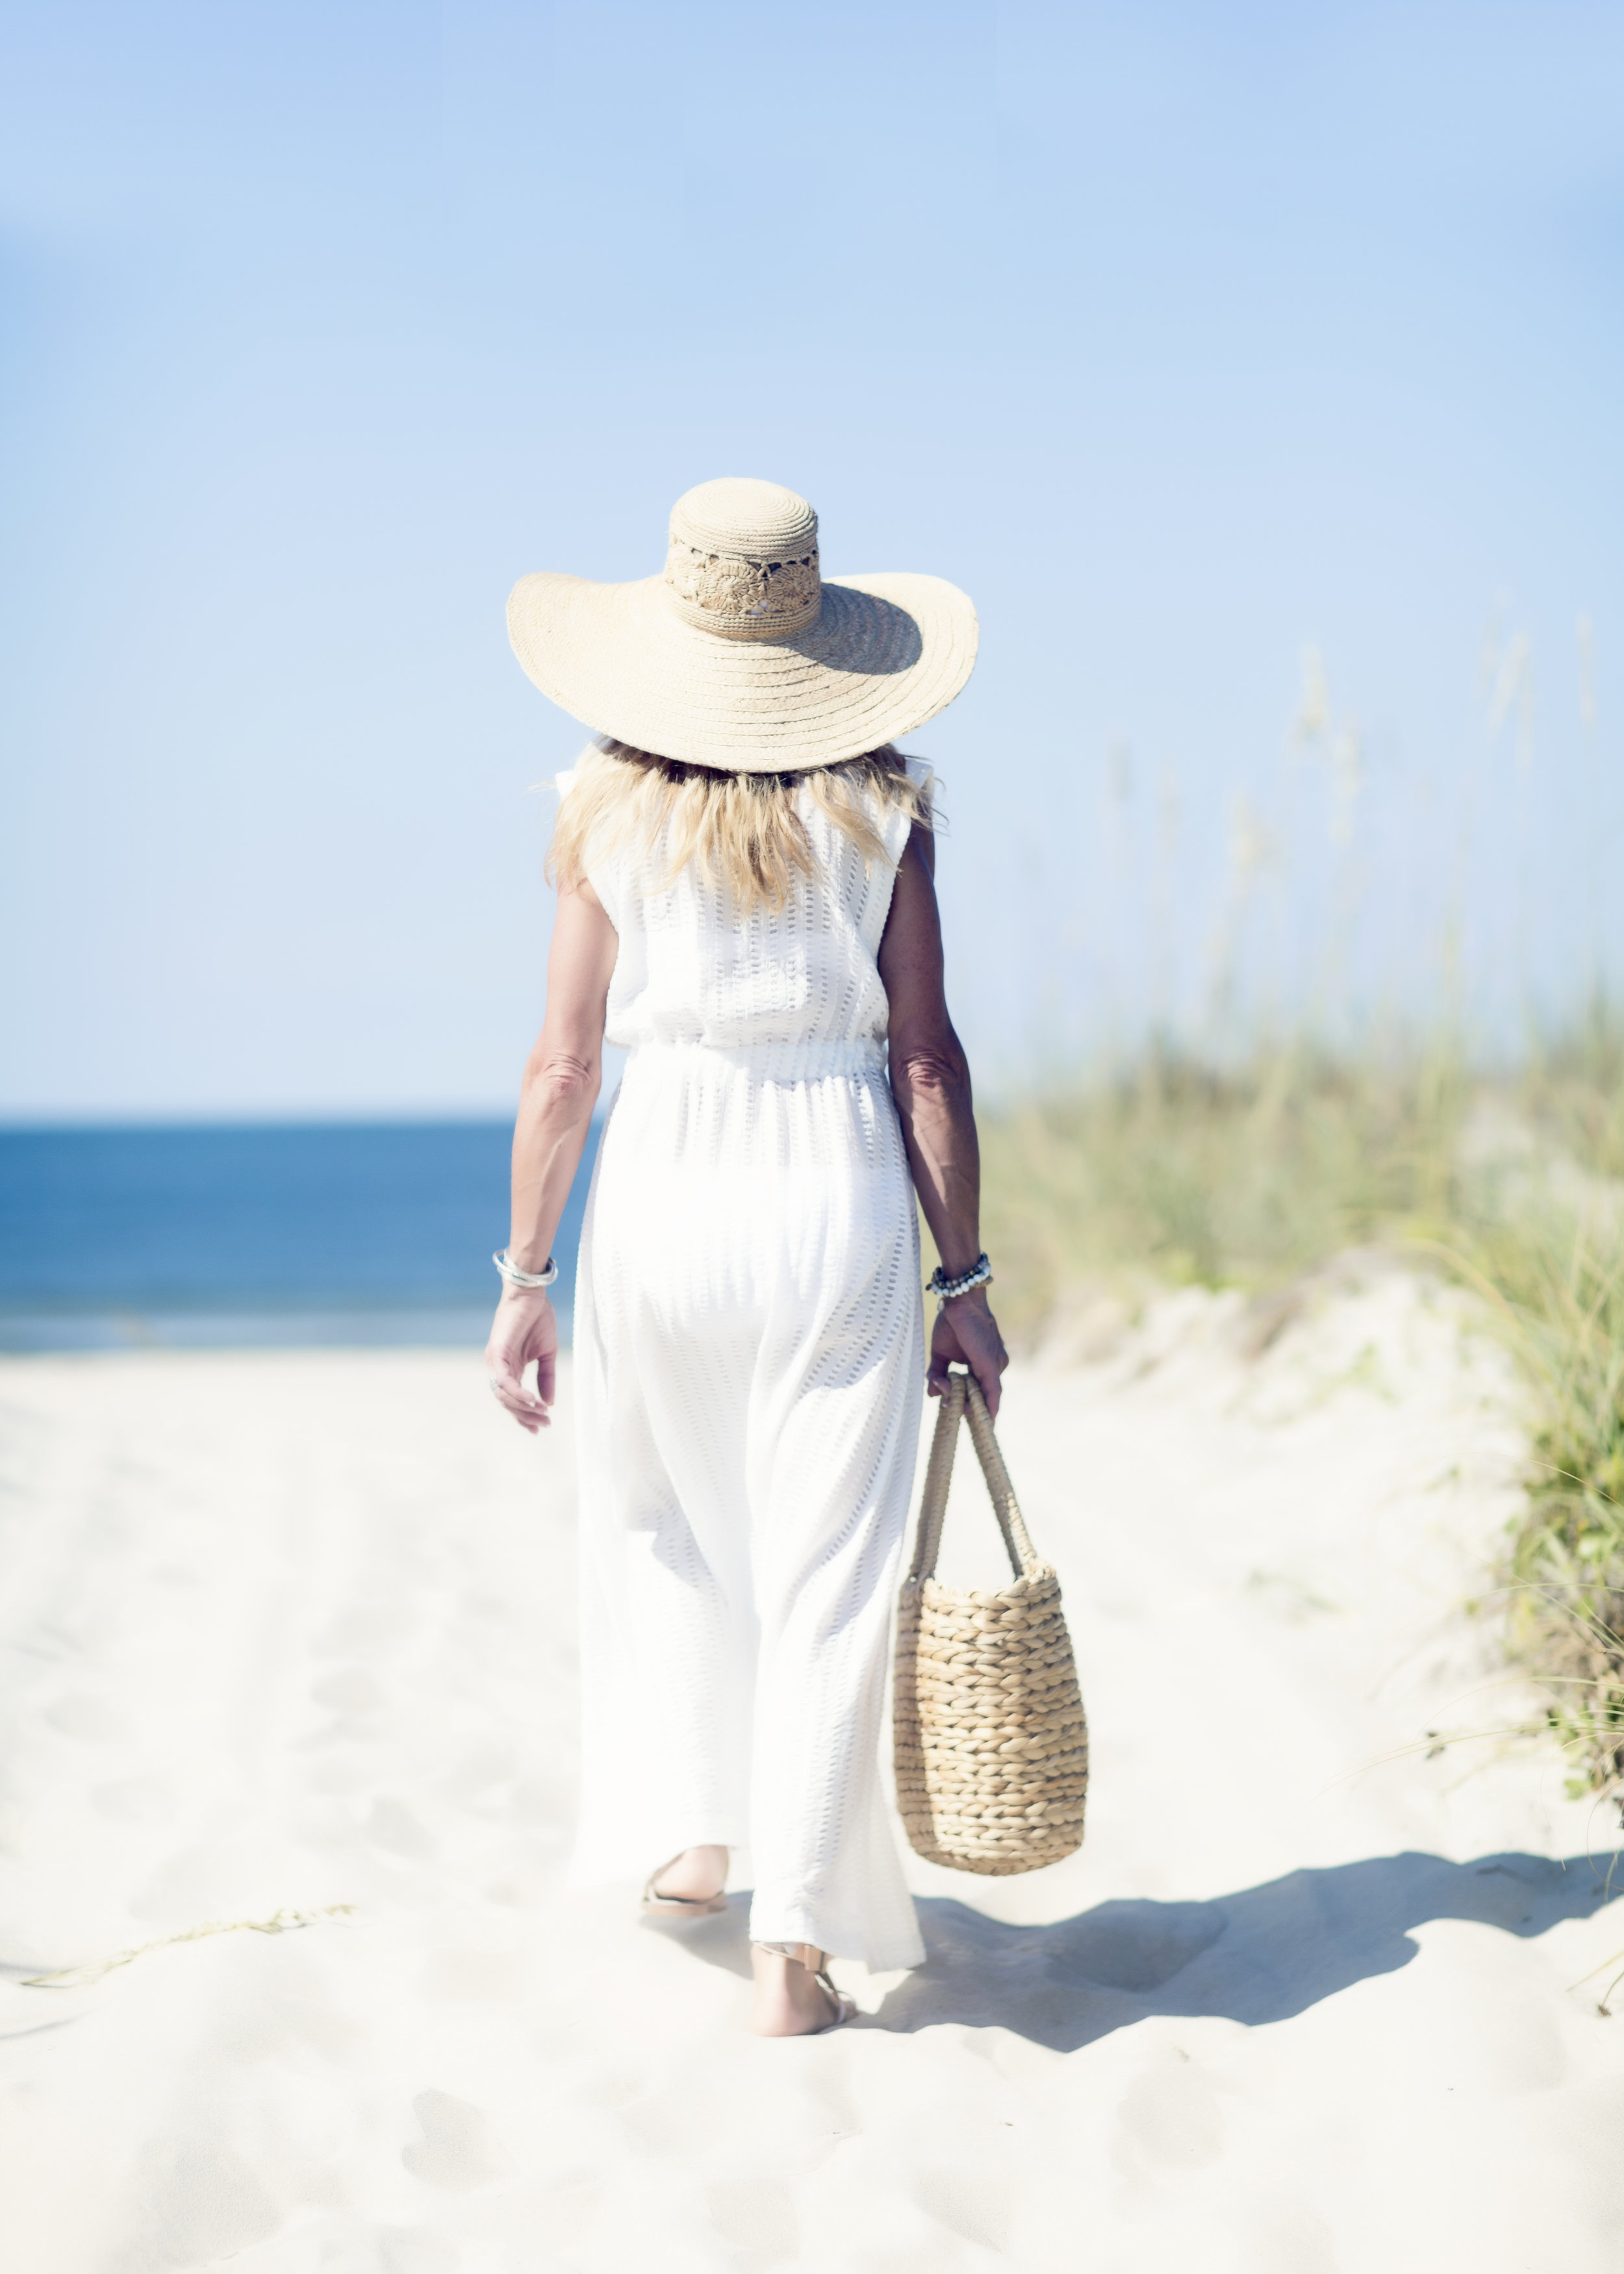 Bald Head Island - A Place to Reset and Reflect — Crazy Blonde Life